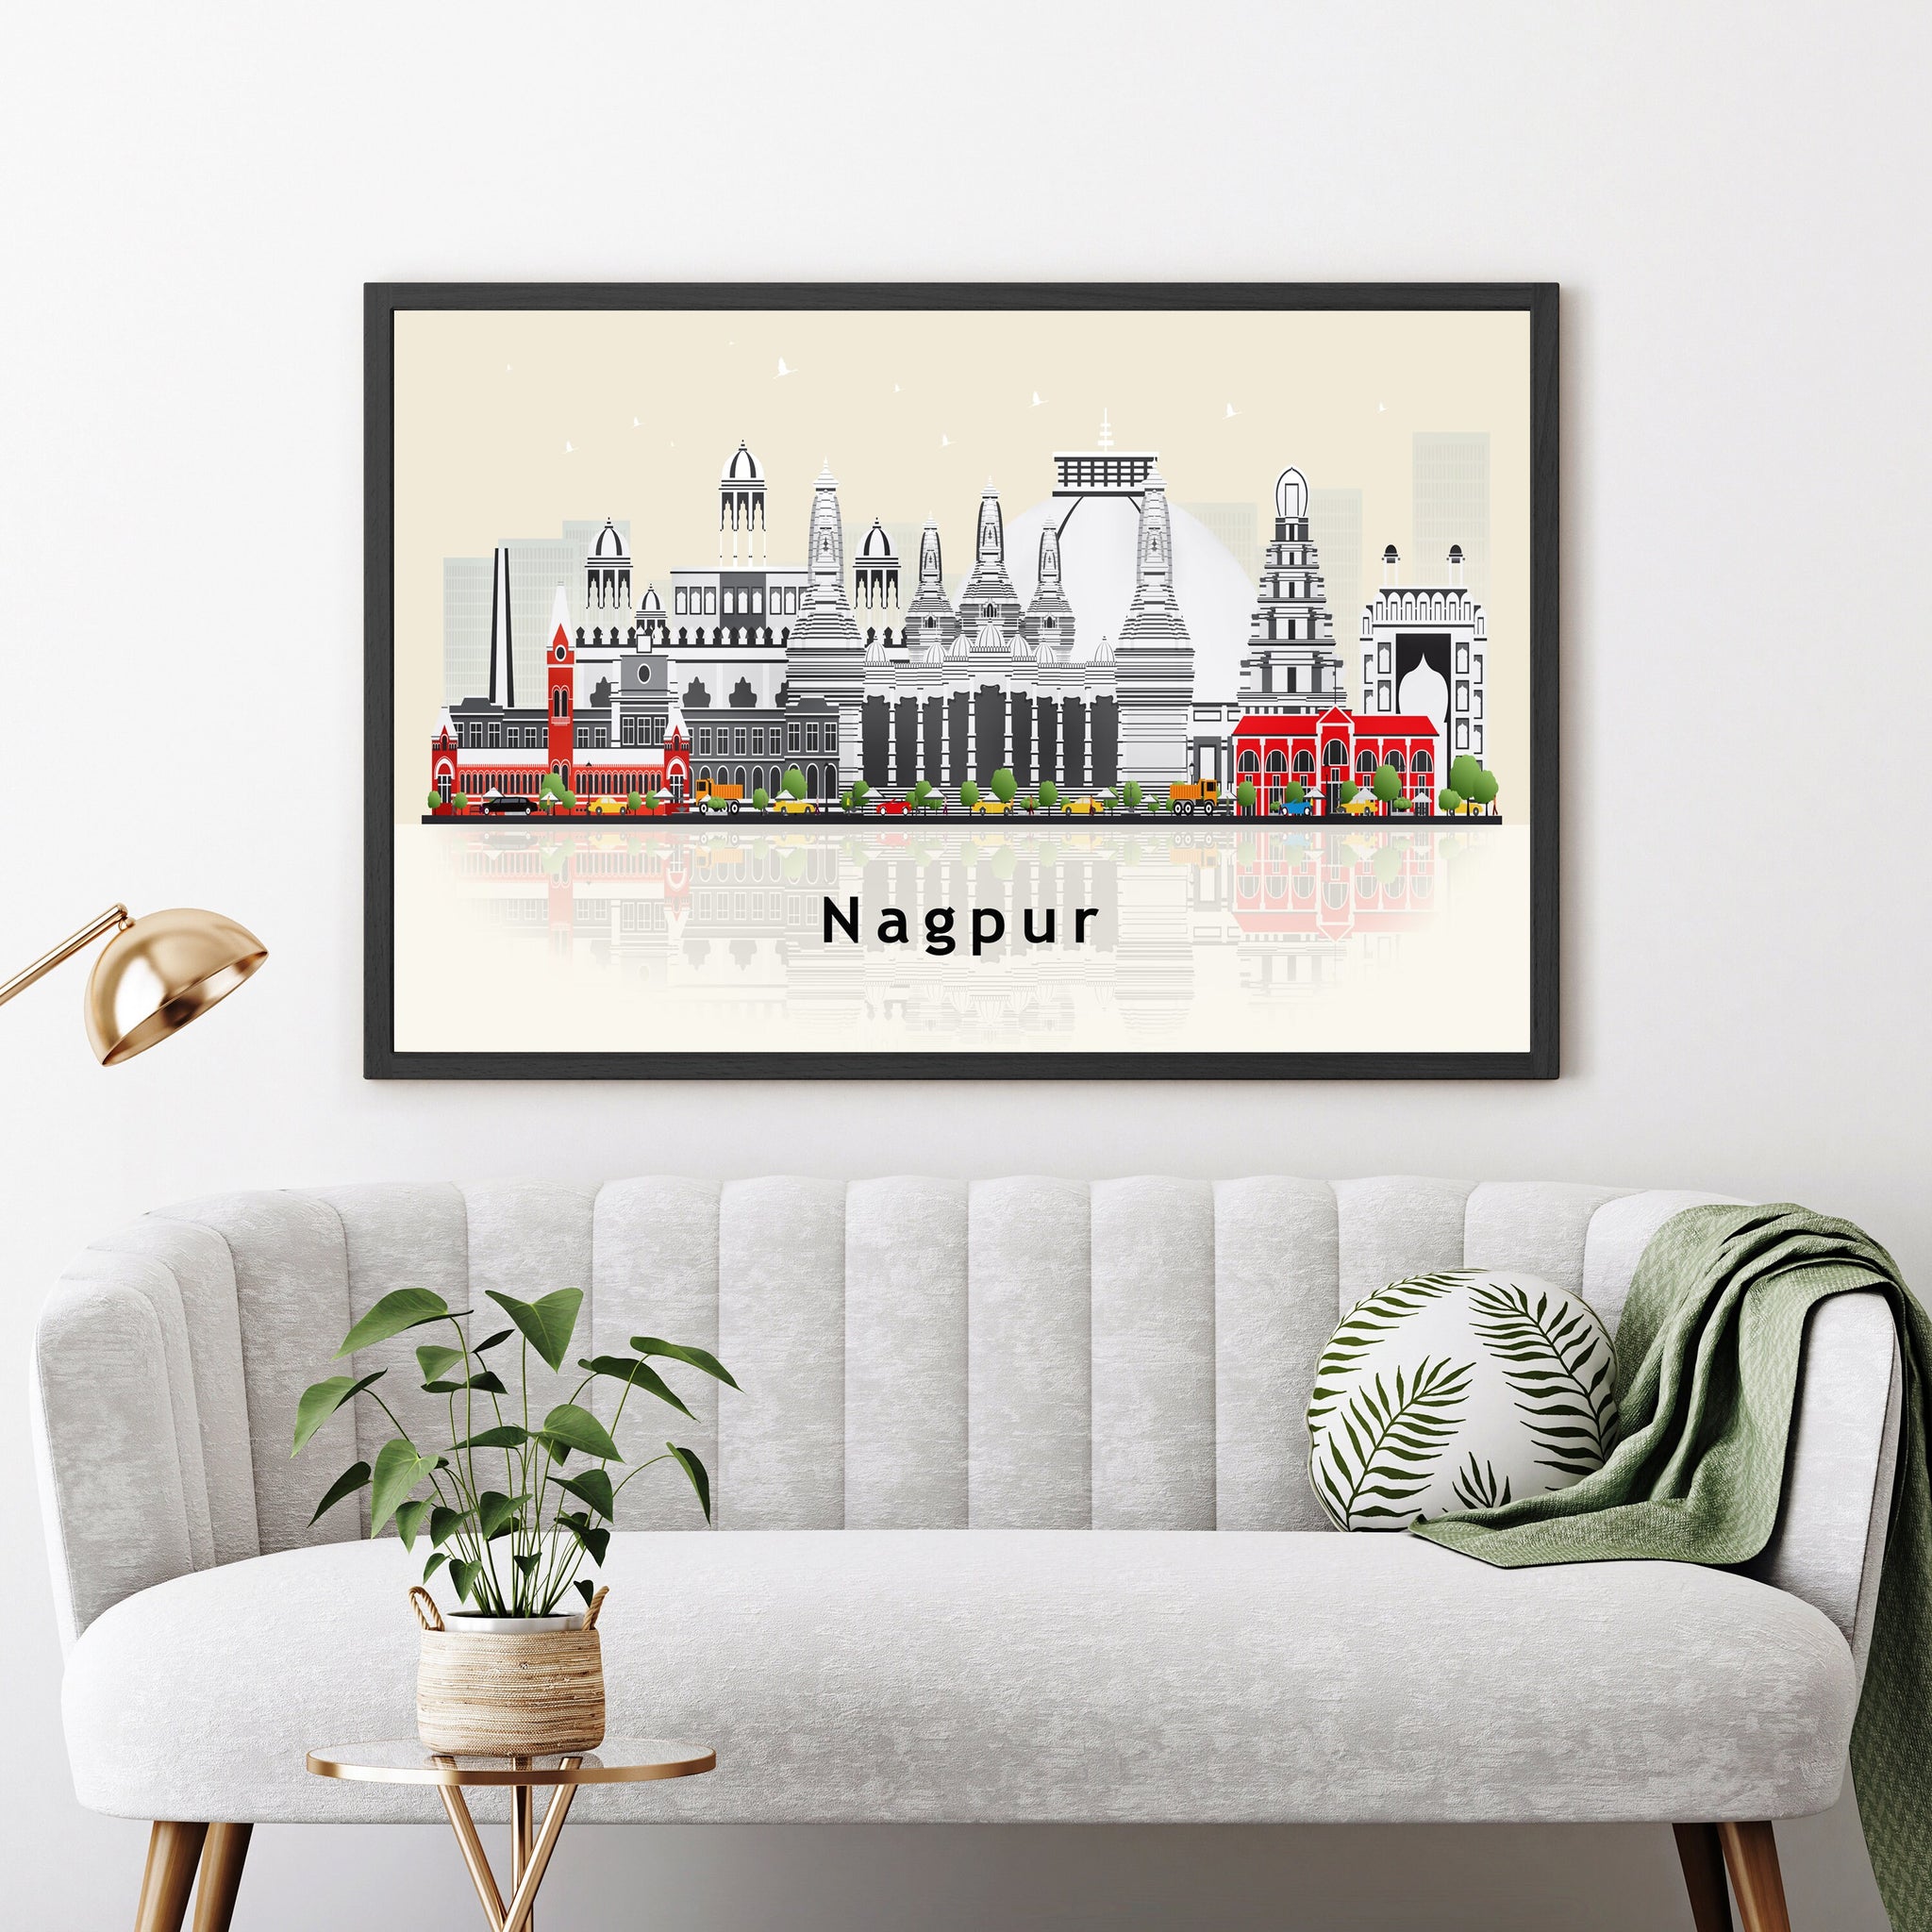 NAGPUR INDIA Illustration skyline poster, Modern skyline cityscape poster, India city skyline landmark map poster, Home wall decoration